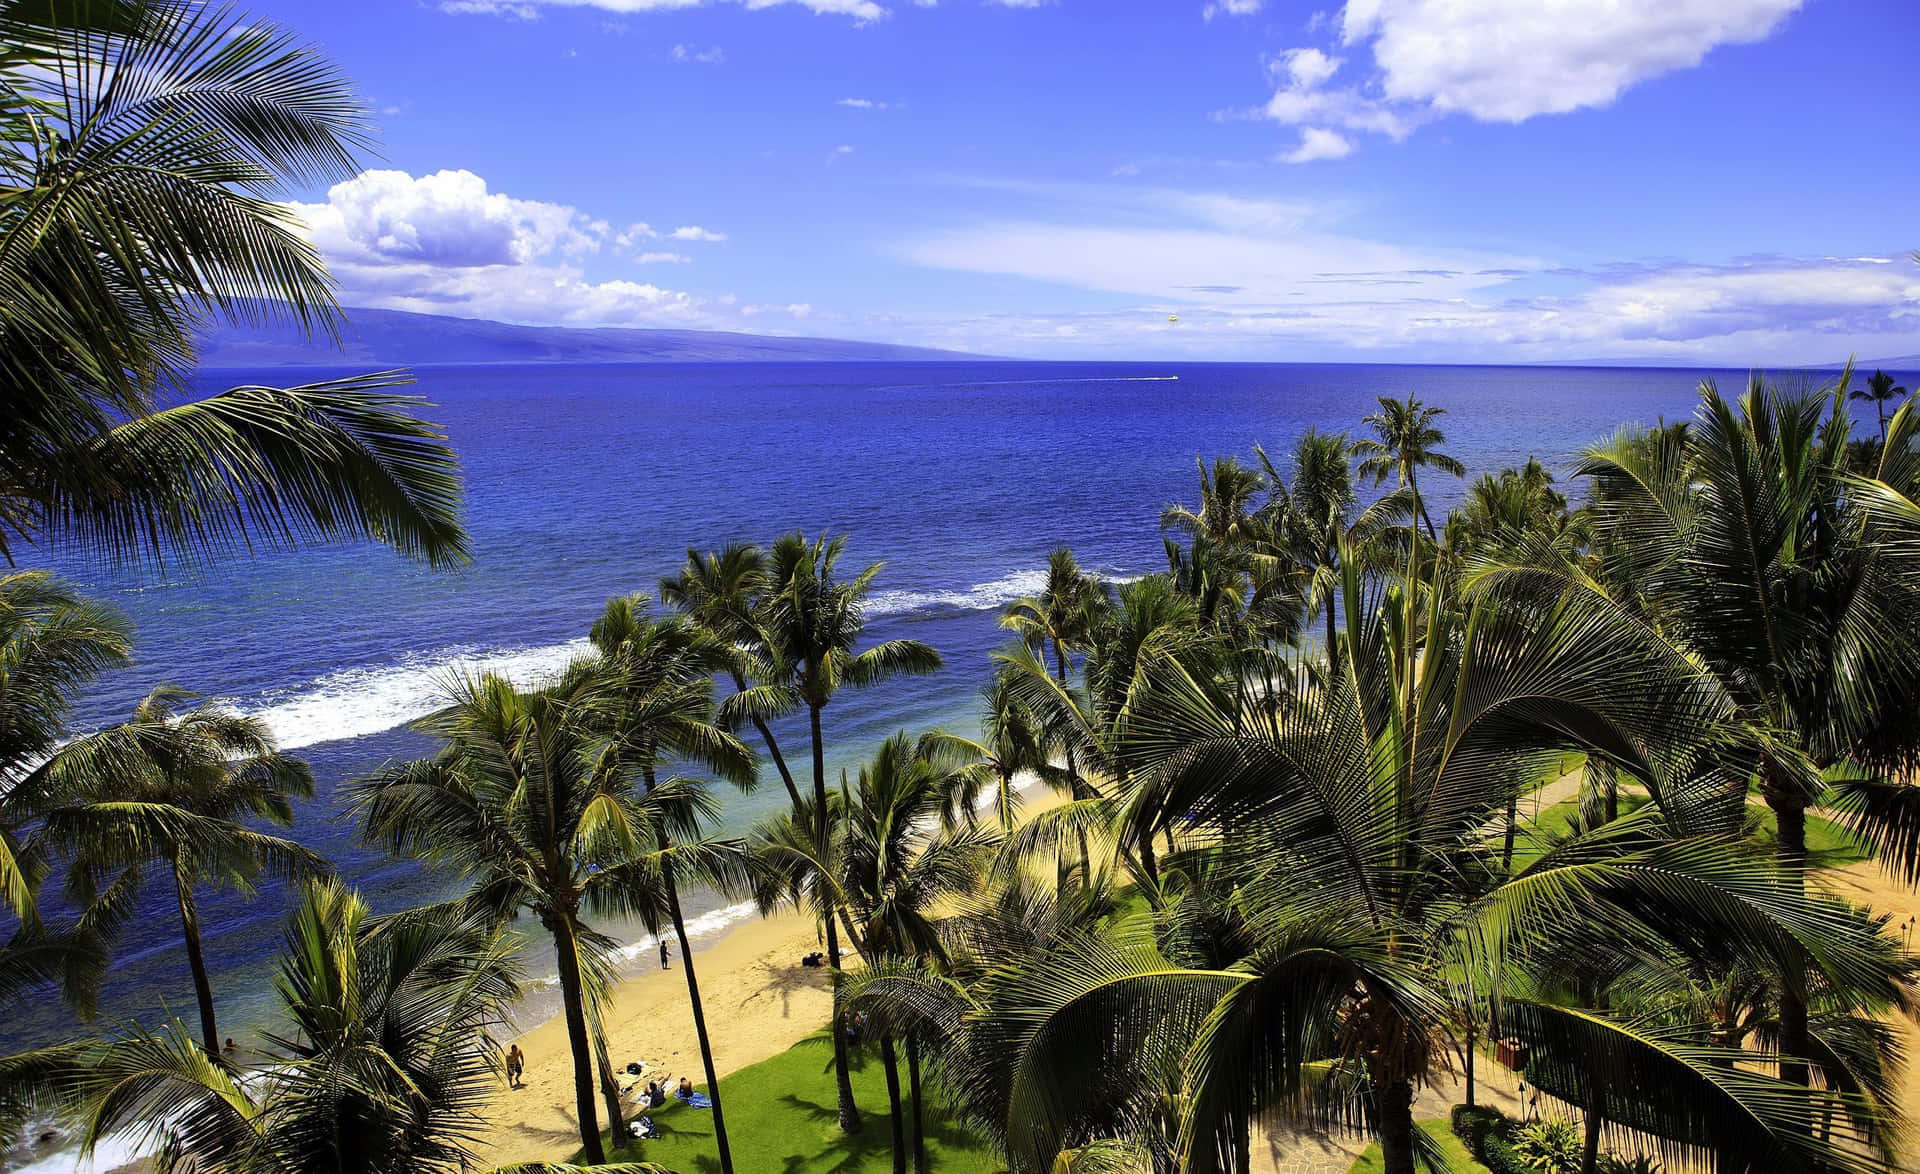 Take in the view of Aesthetic Hawaii Wallpaper